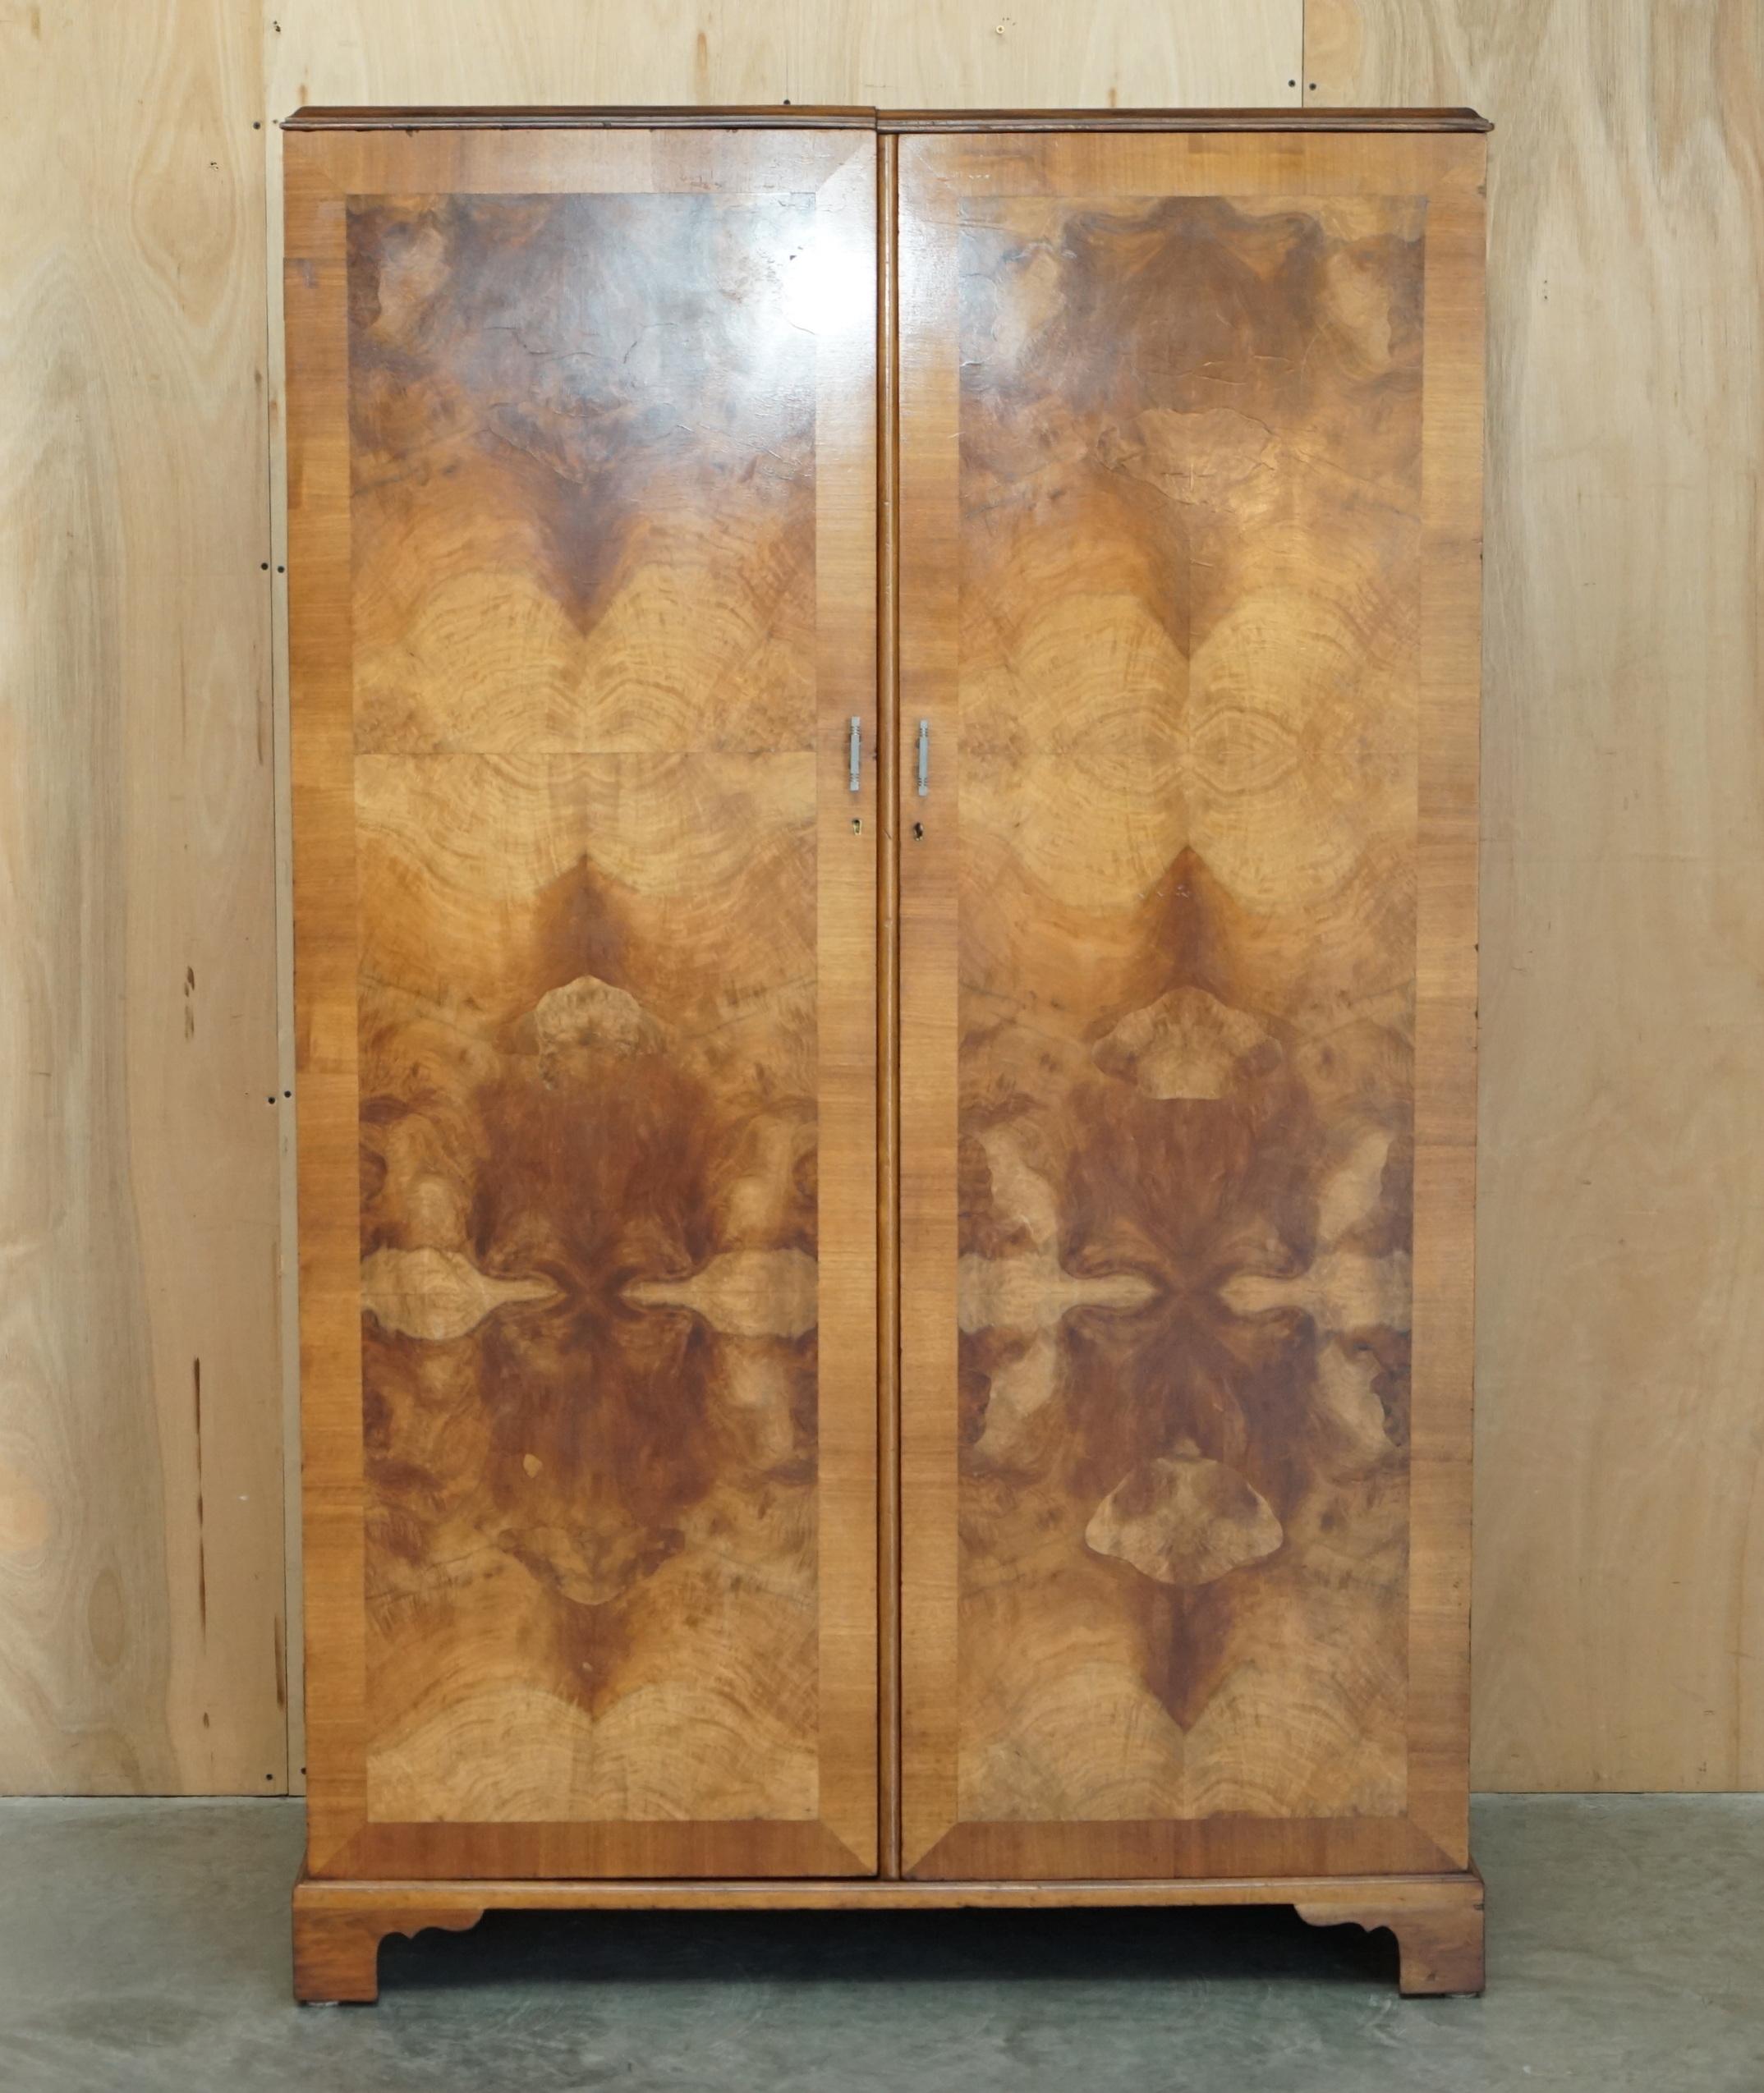 Campaign ANTIQUE BURR WALNUT WARDROBE WiTH MILITARY CAMPAIGN CHEST OF DRAWERS BUILT IN For Sale